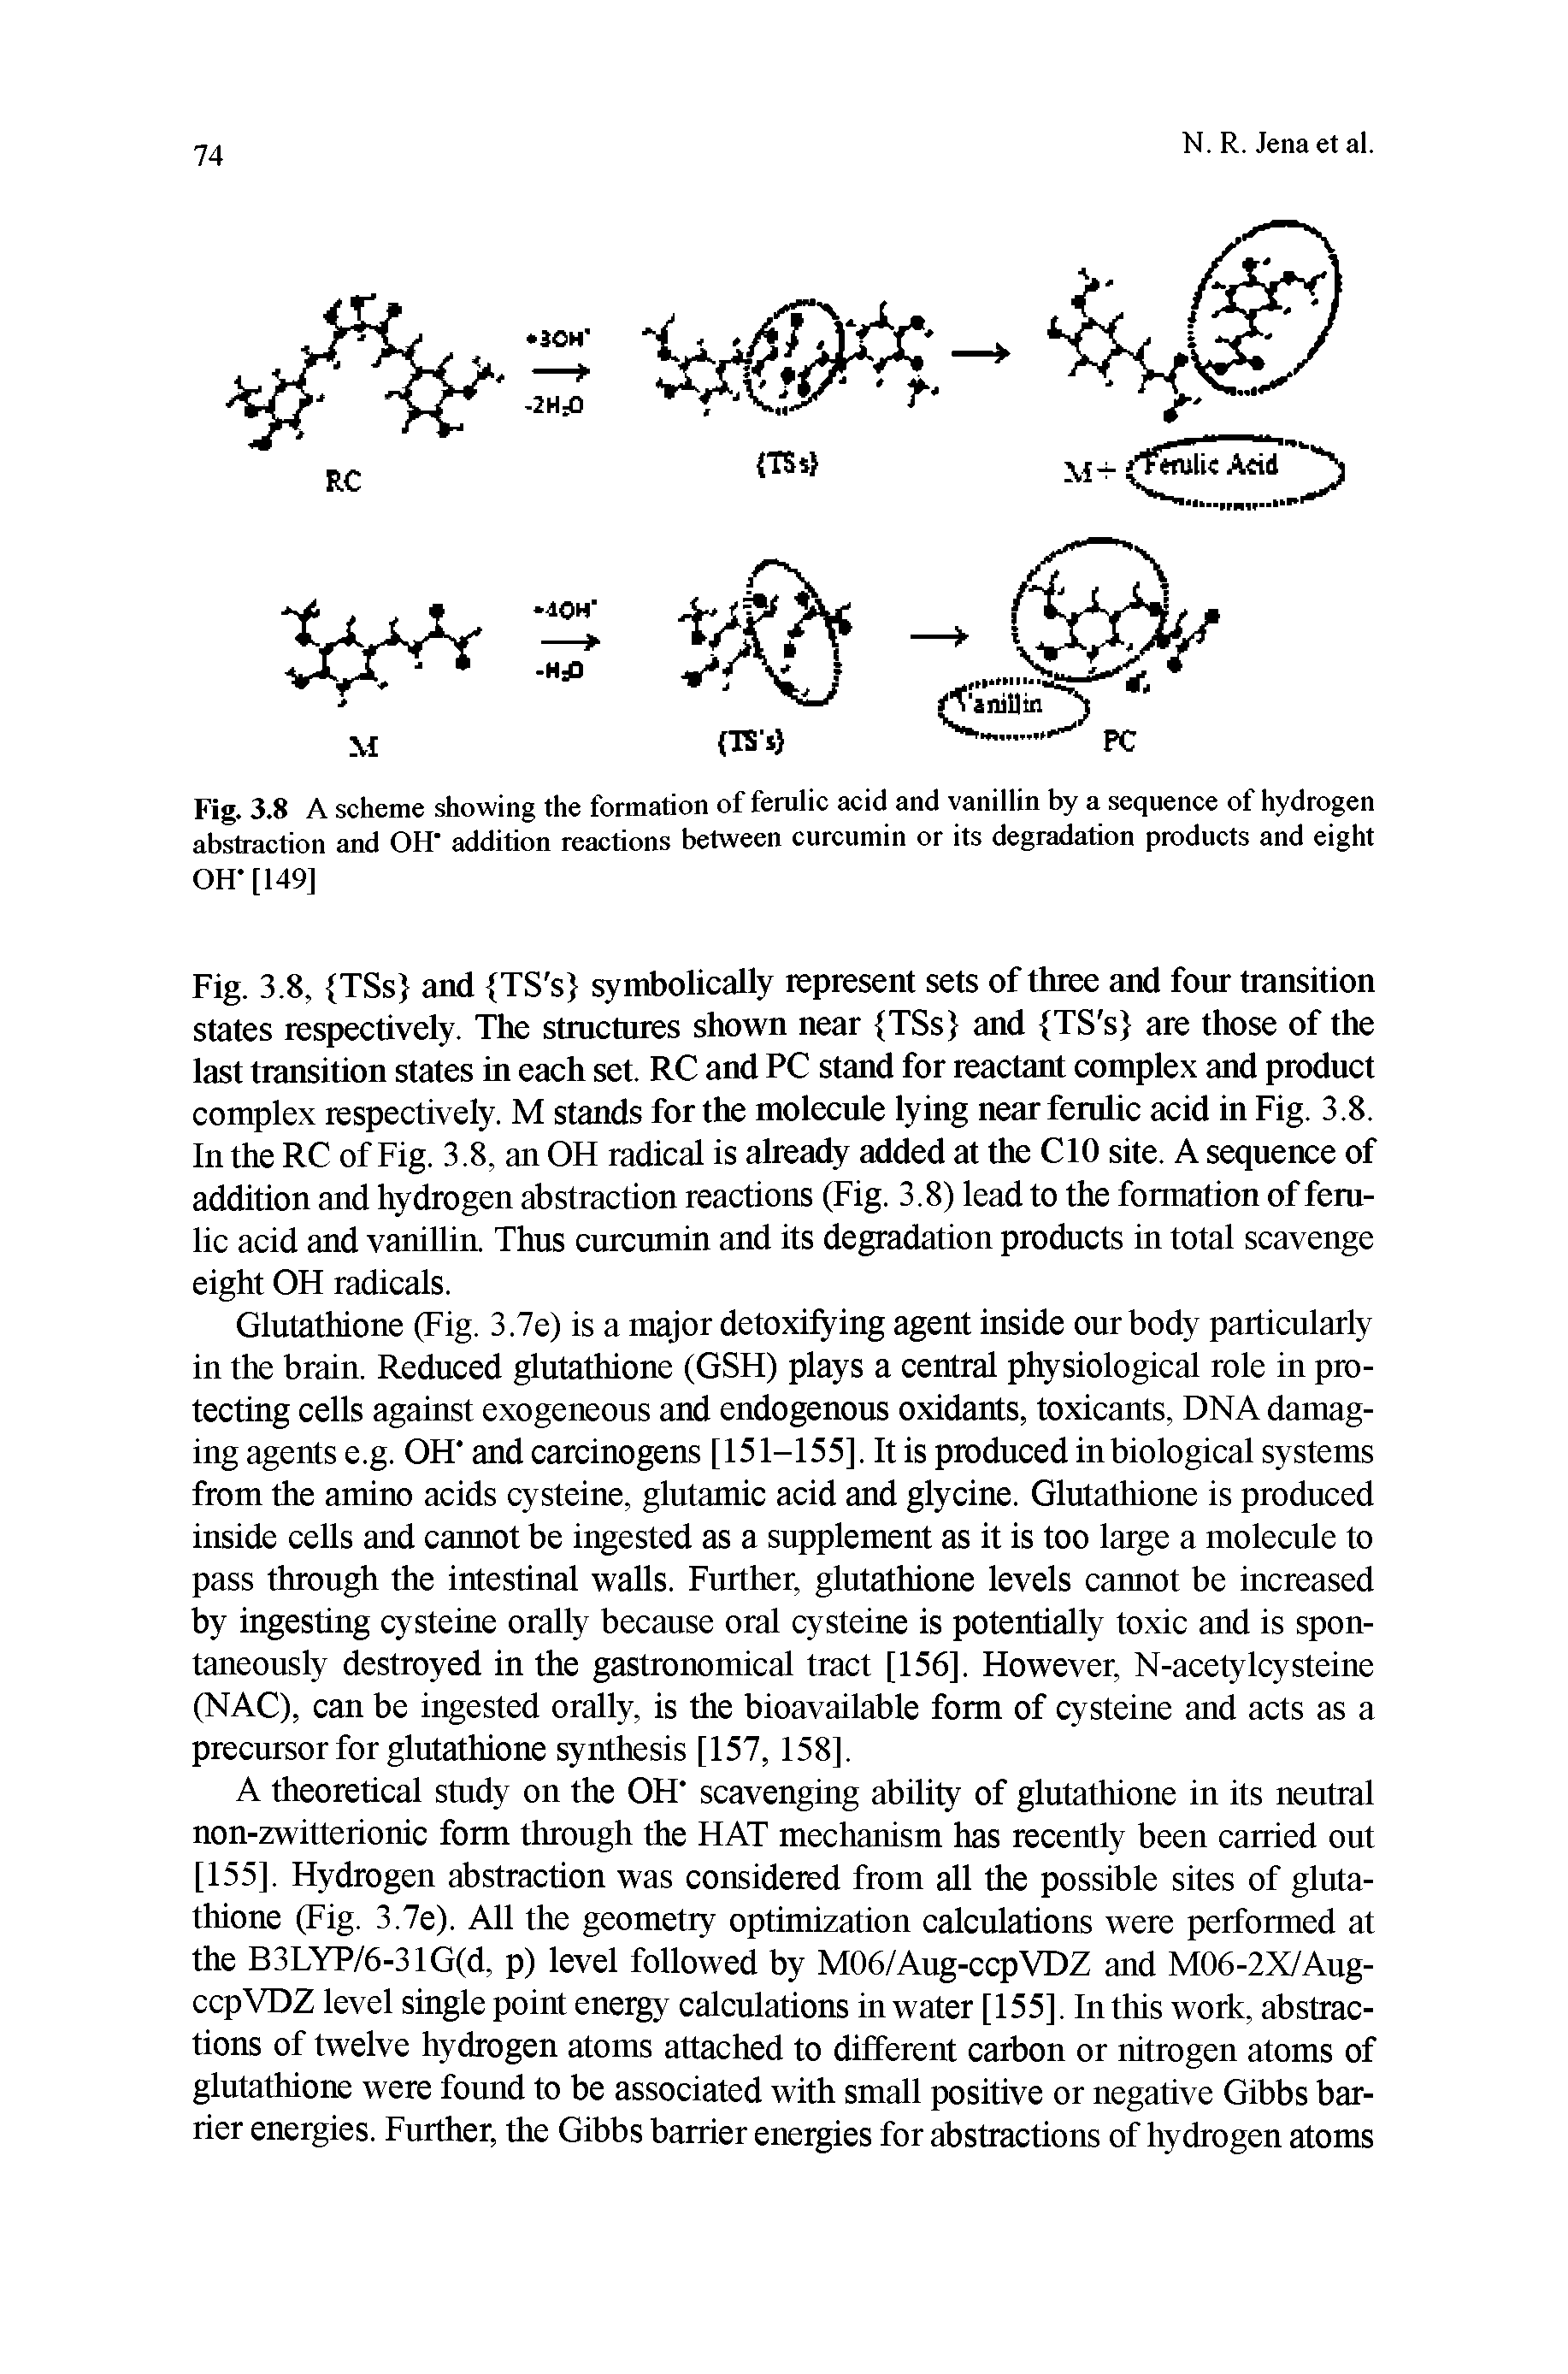 Fig. 3.8 A scheme showing the formation of ferulic acid and vanillin by a sequence of hydrogen abstraction and OH" addition reactions between curcumin or its degradation products and eight OH [149]...